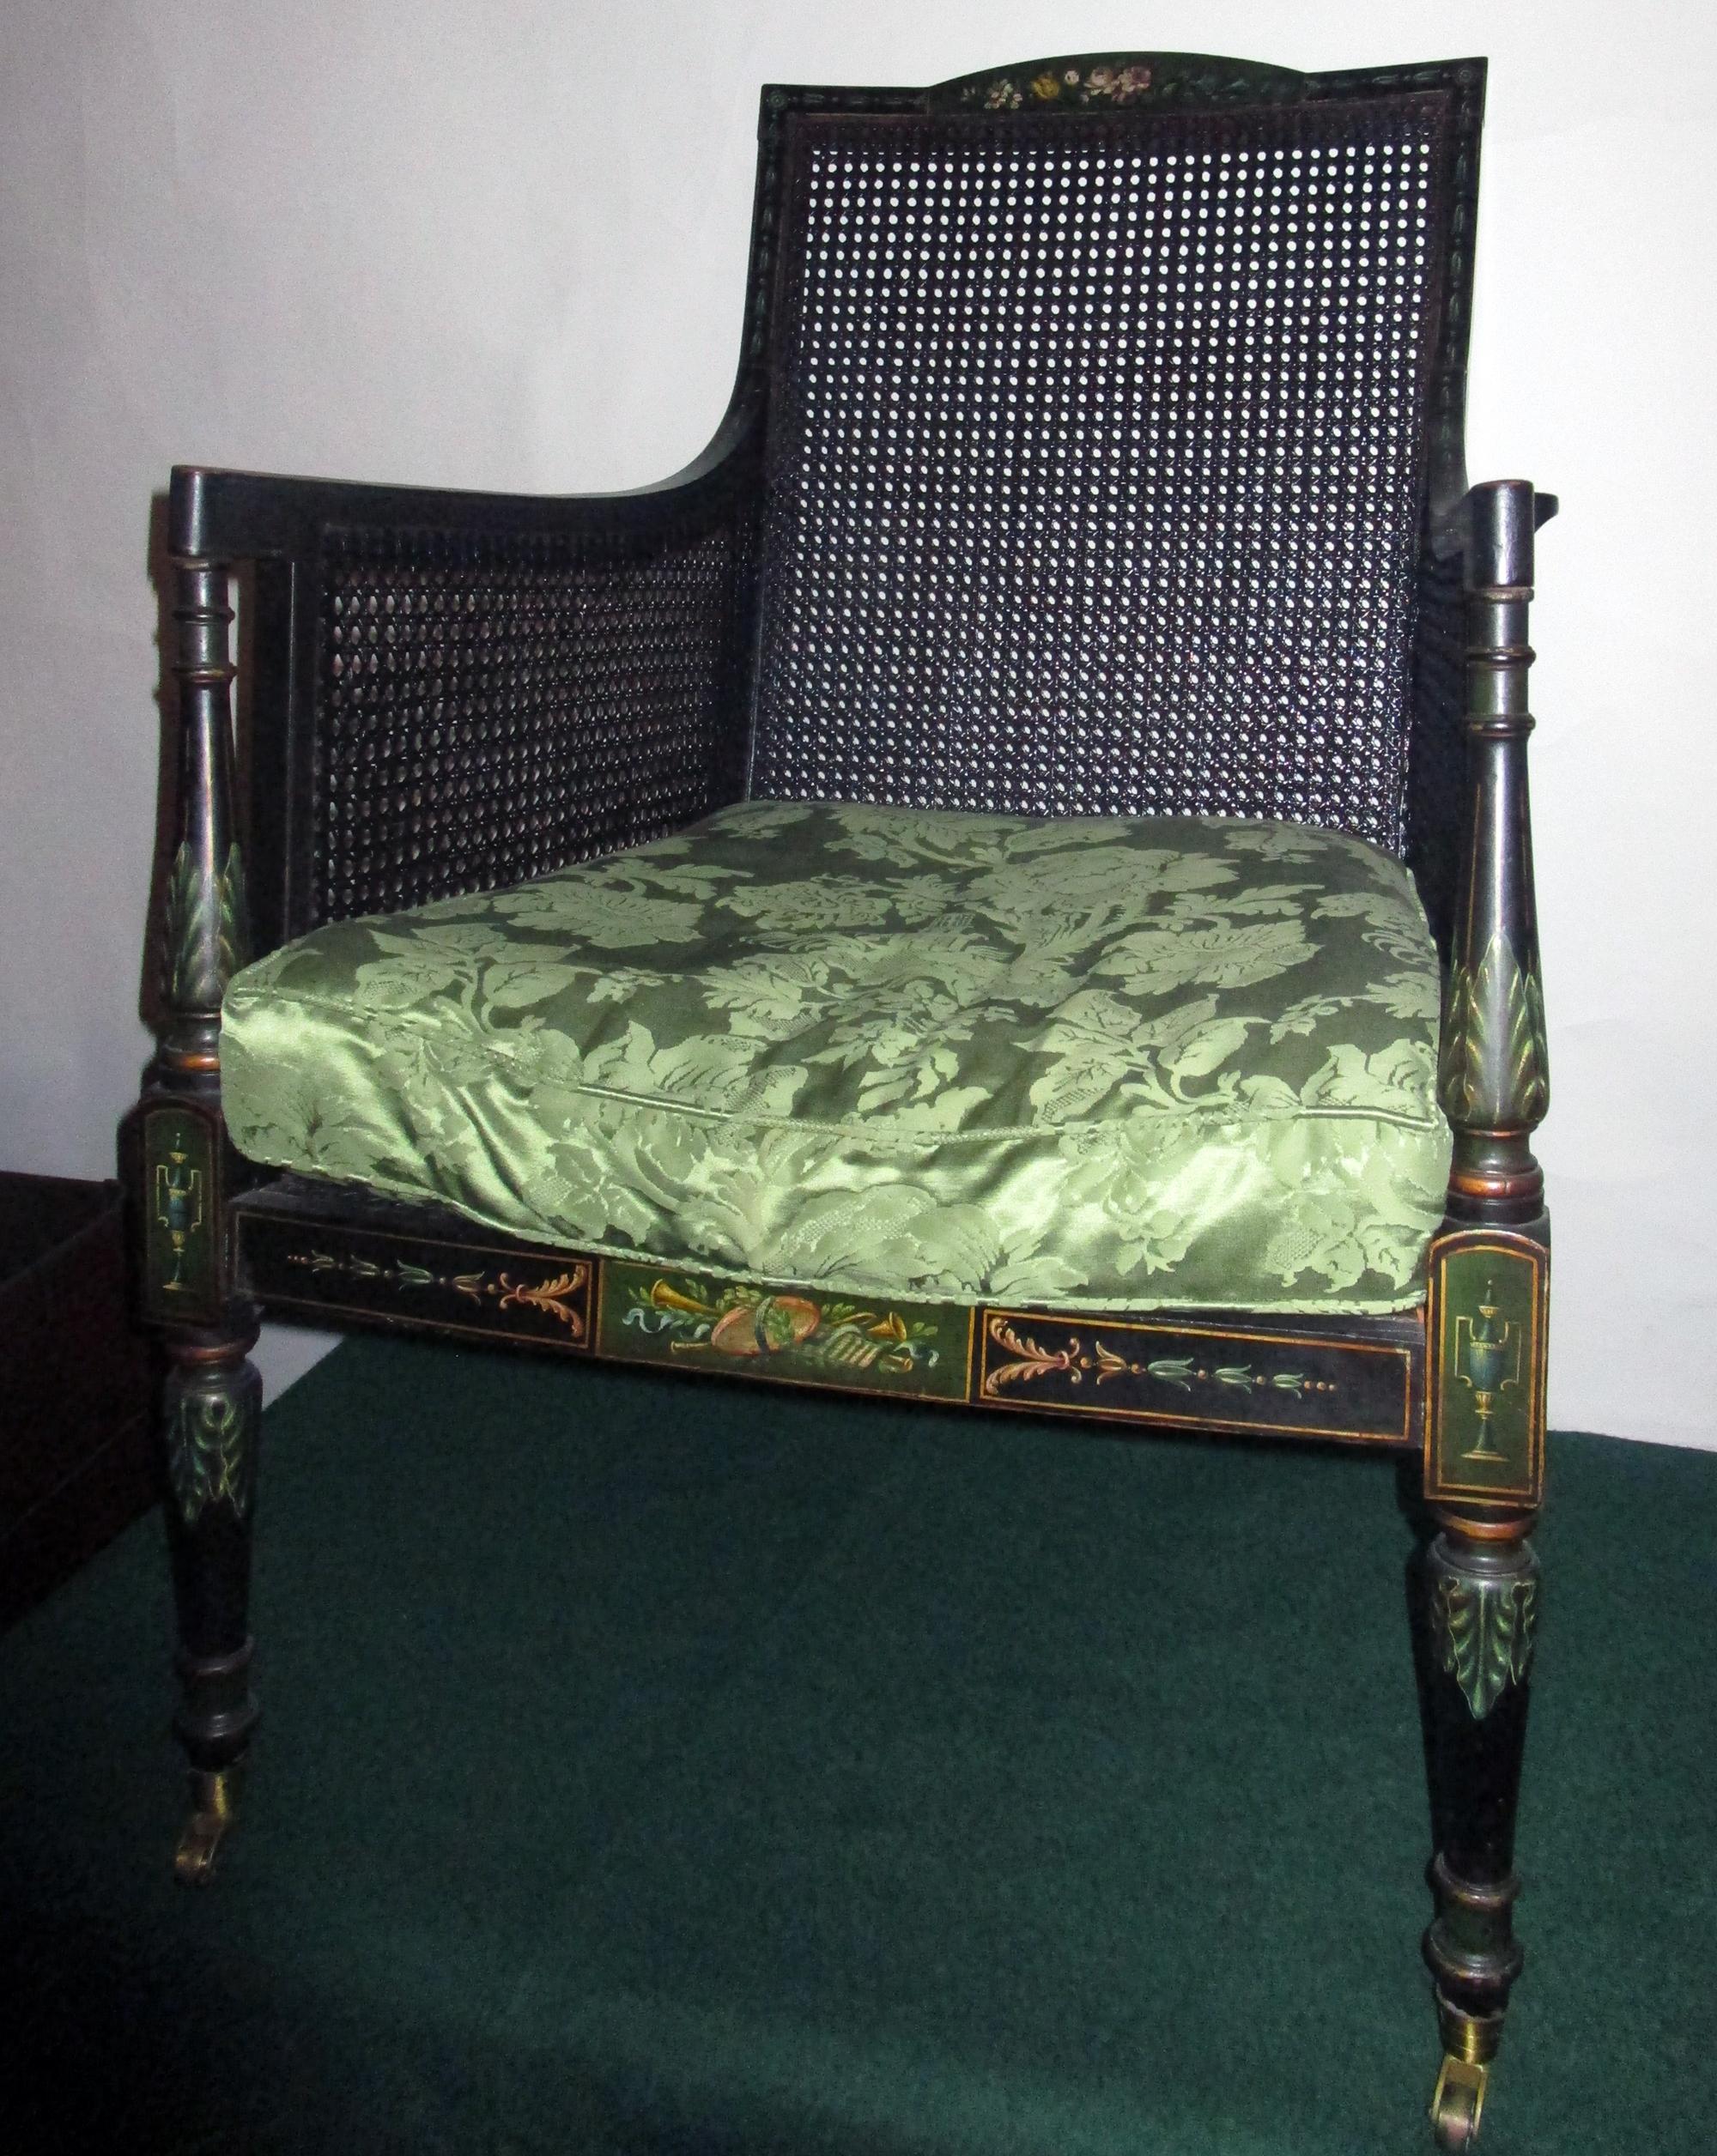 Exquisite 19th century ebonized wooden bergère armchair with caned back, bottom and sides. It is difficult to photograph all the details so please view all of the images. The original painting is incredible and features colorful, delicate flowers